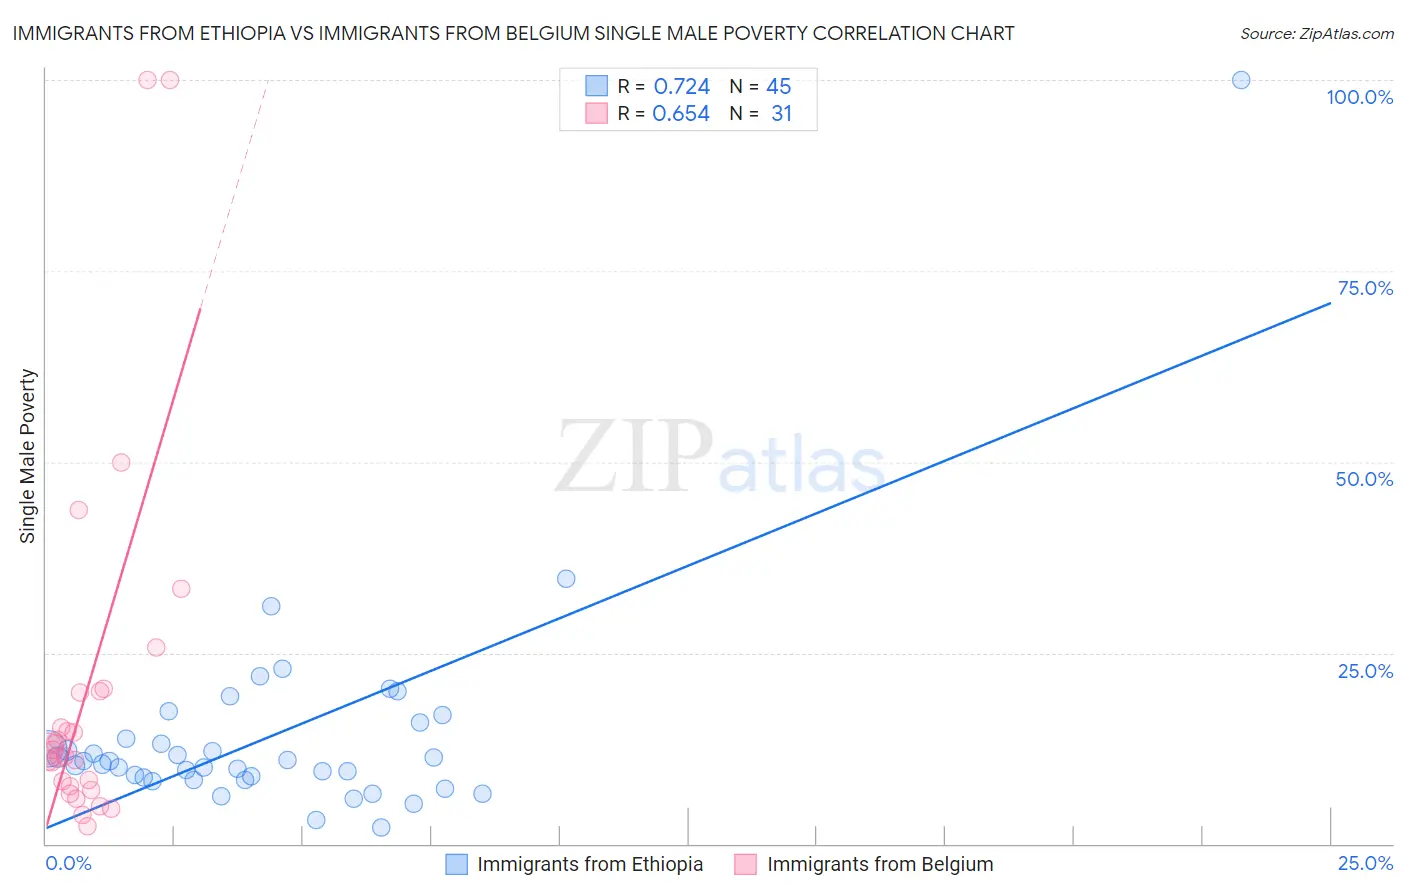 Immigrants from Ethiopia vs Immigrants from Belgium Single Male Poverty